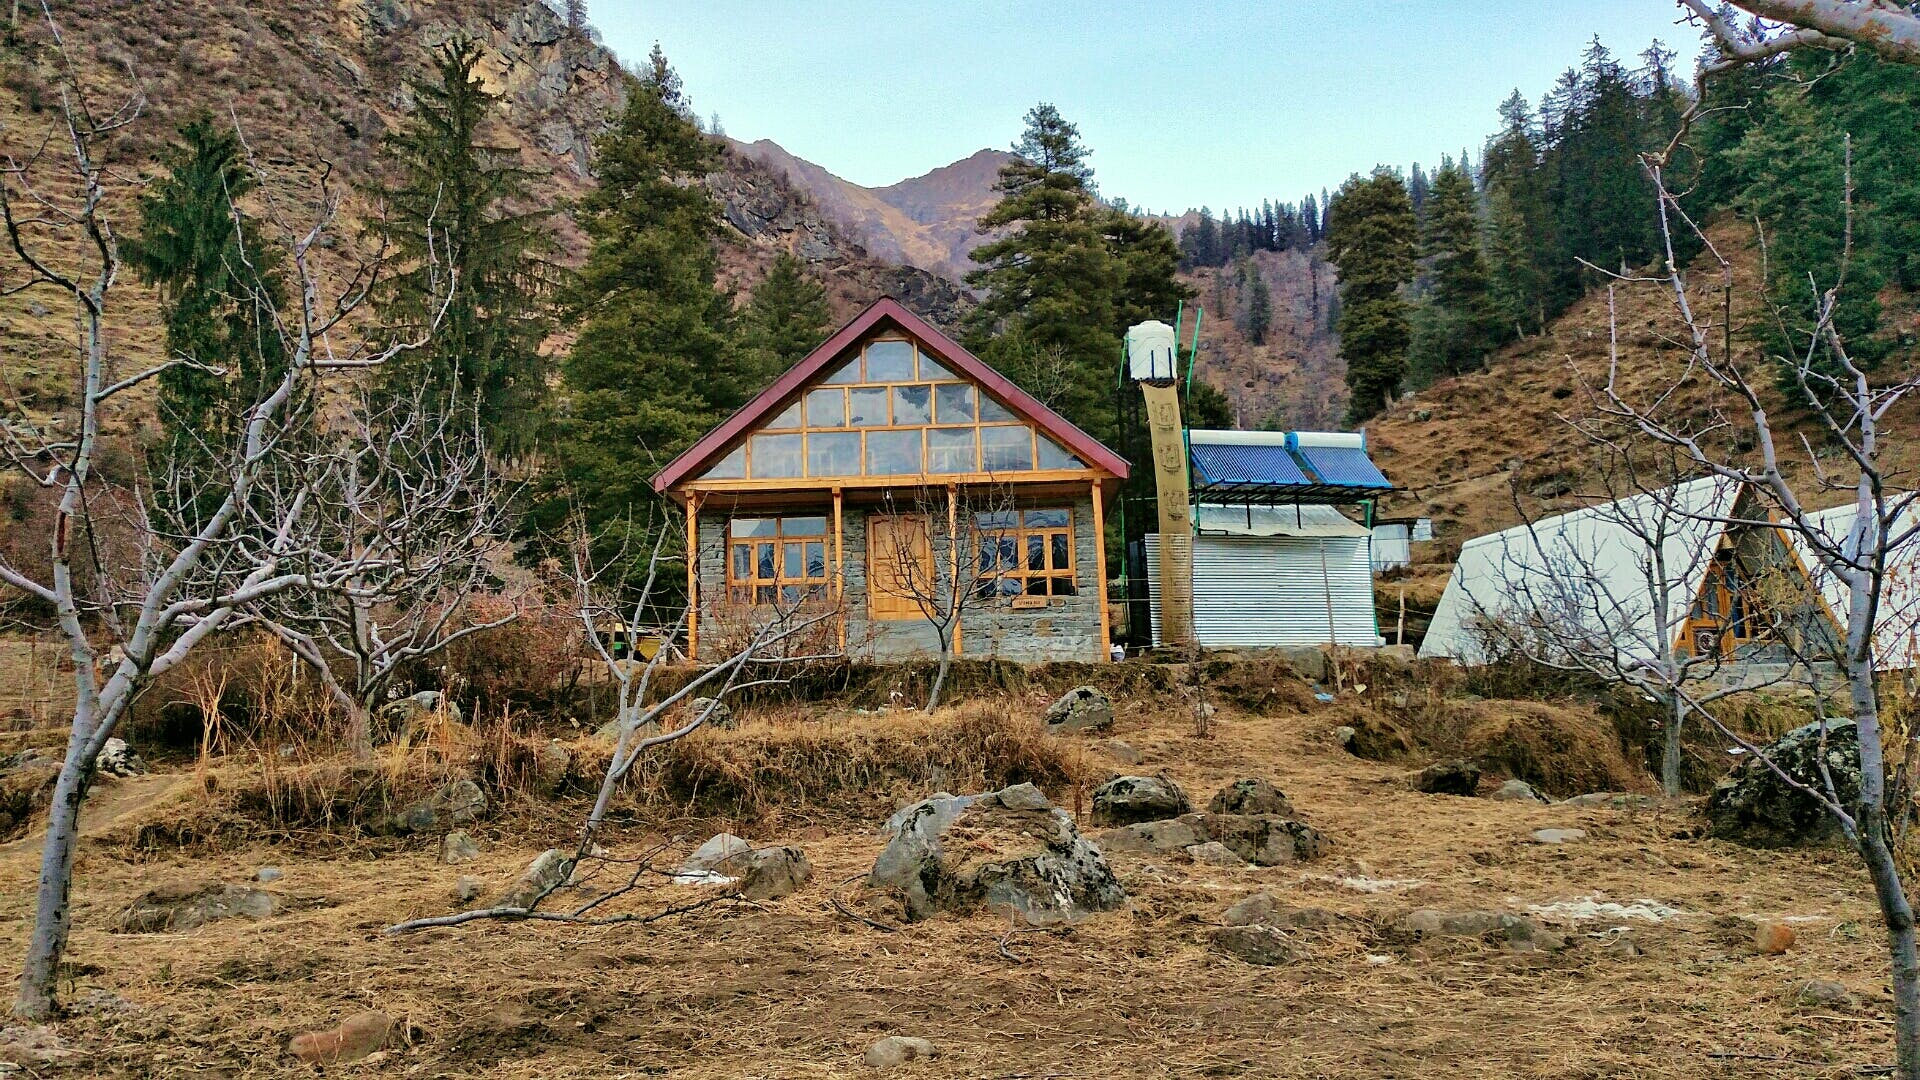 House,Property,Natural landscape,Mountain,Geological phenomenon,Tree,Wilderness,Home,Hut,Cottage